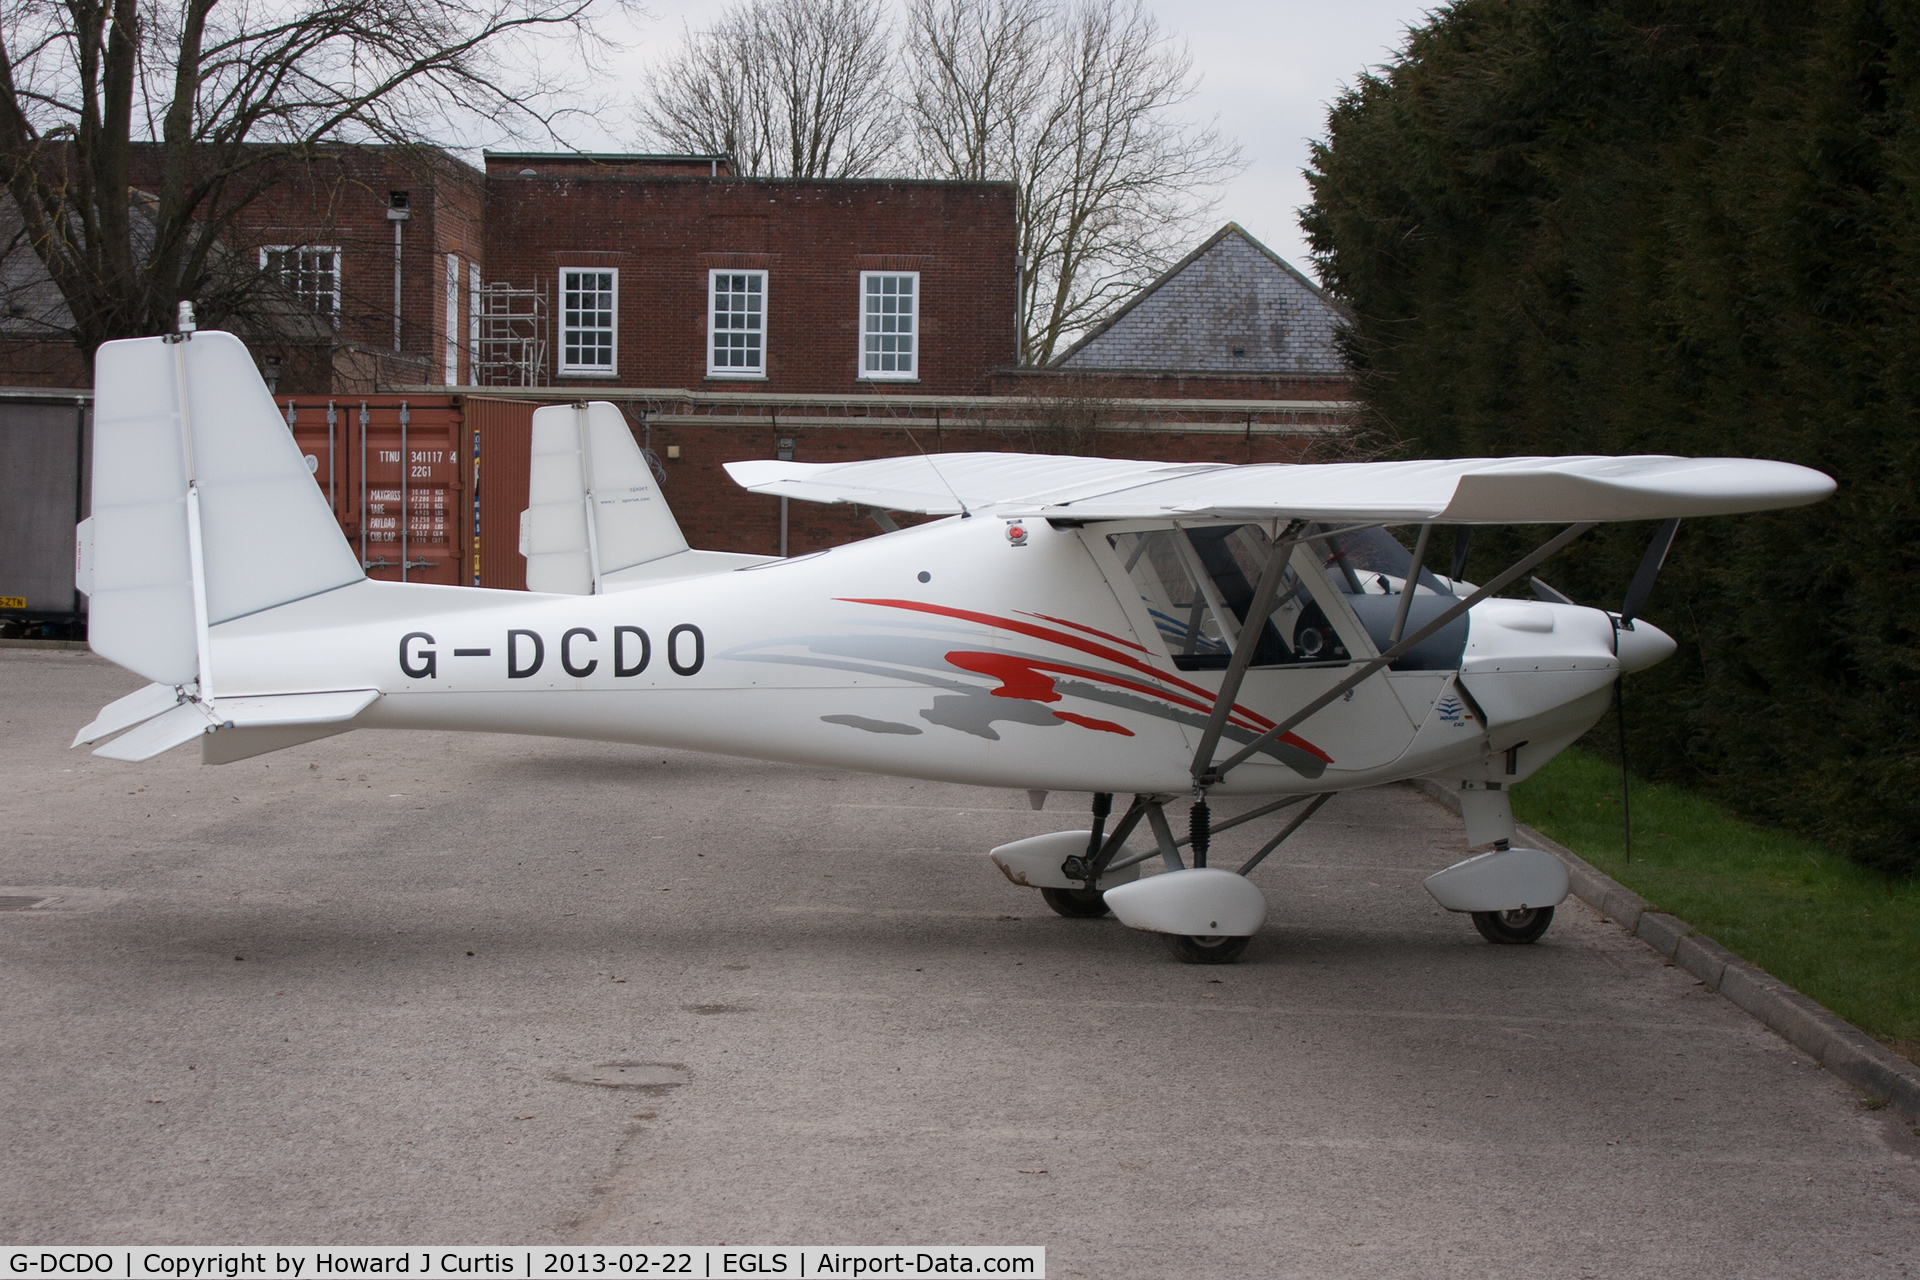 G-DCDO, 2010 Comco Ikarus C42 FB80 C/N 1008-7115, Privately owned.